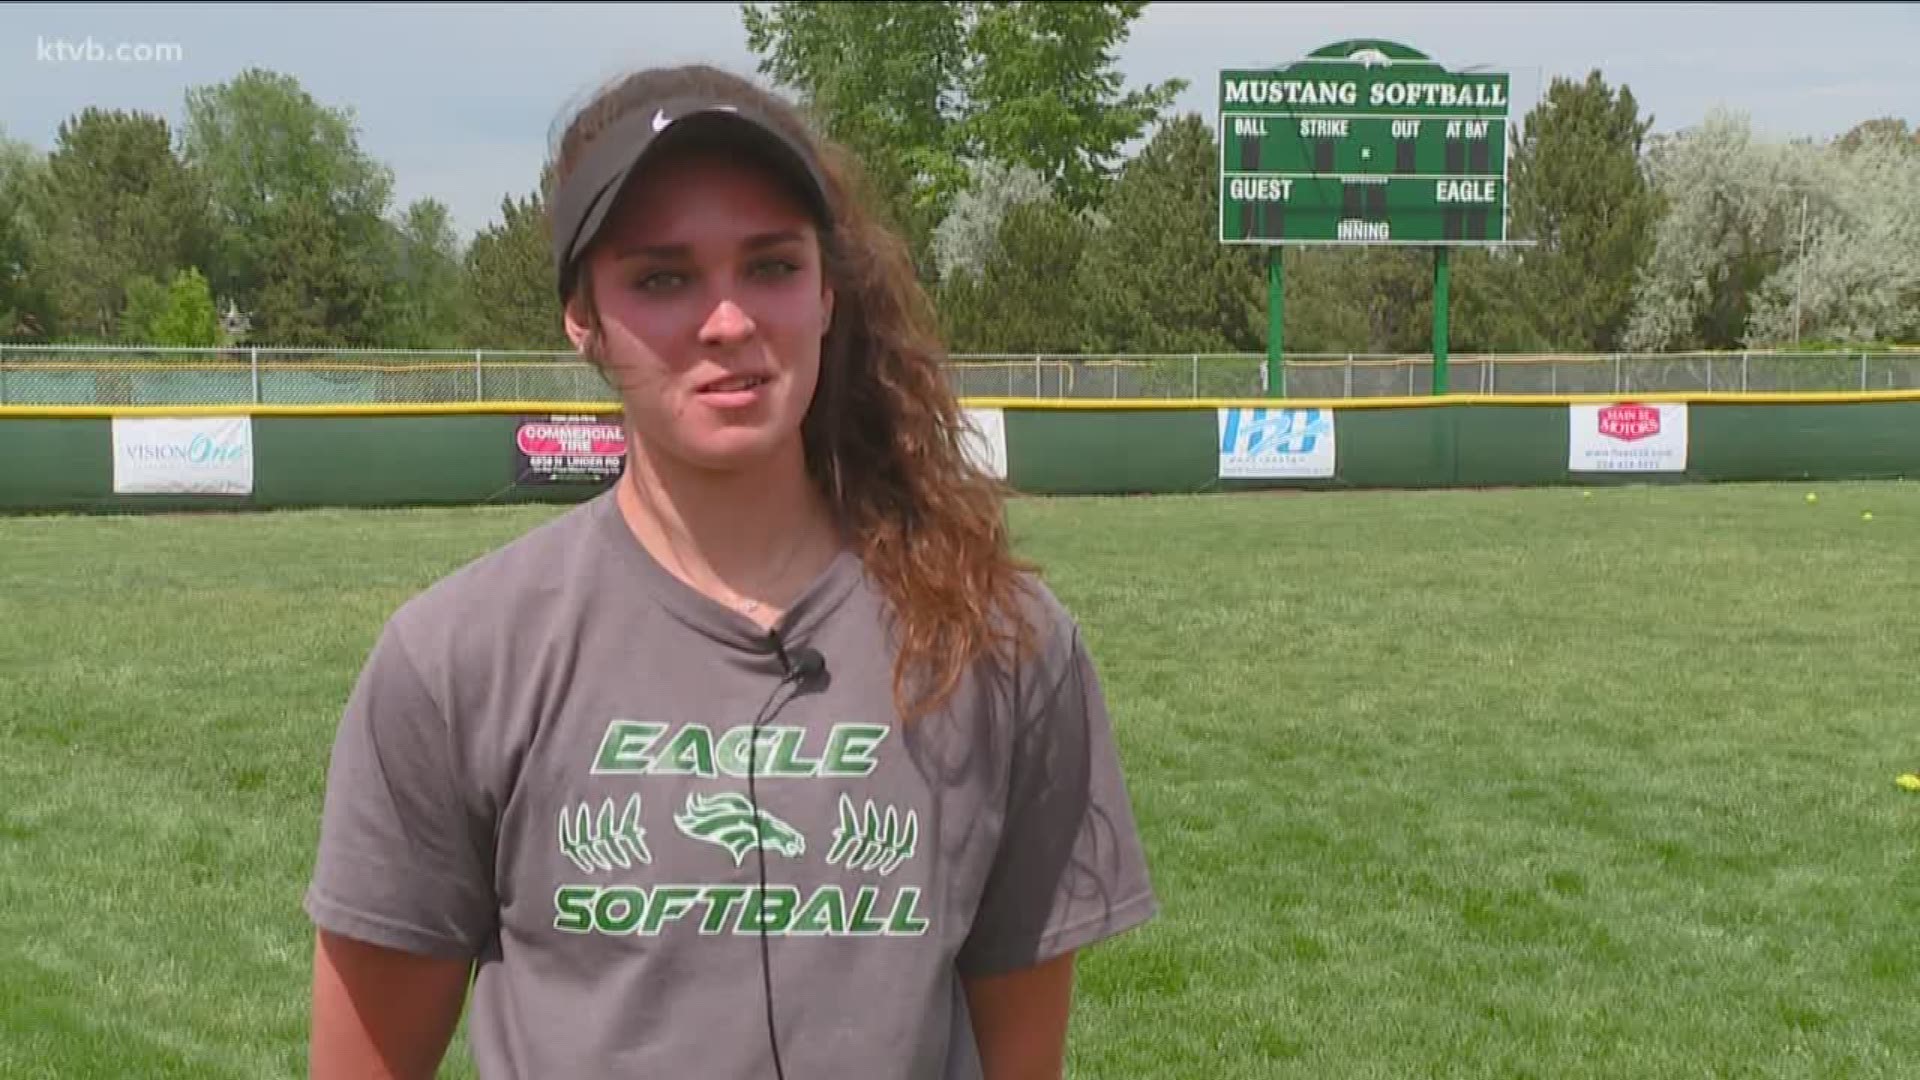 After falling to Boise in the 2018 state title game, the Eagle girls softball team is hoping that loss will feed their hunger to win state in 2019.